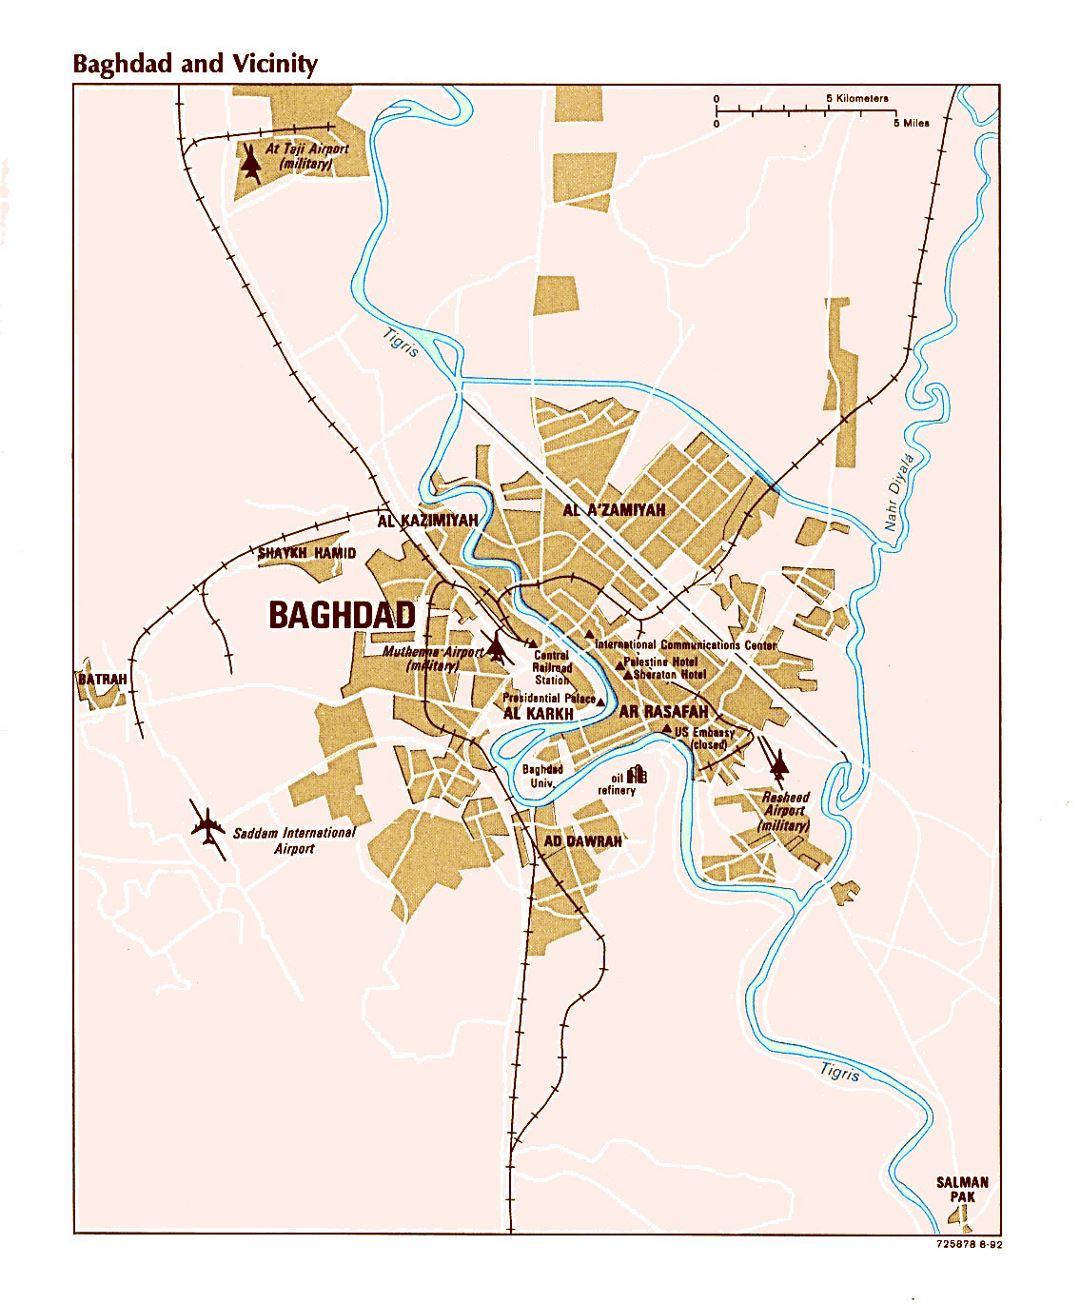 Large map of Baghdad and vicinity with airports